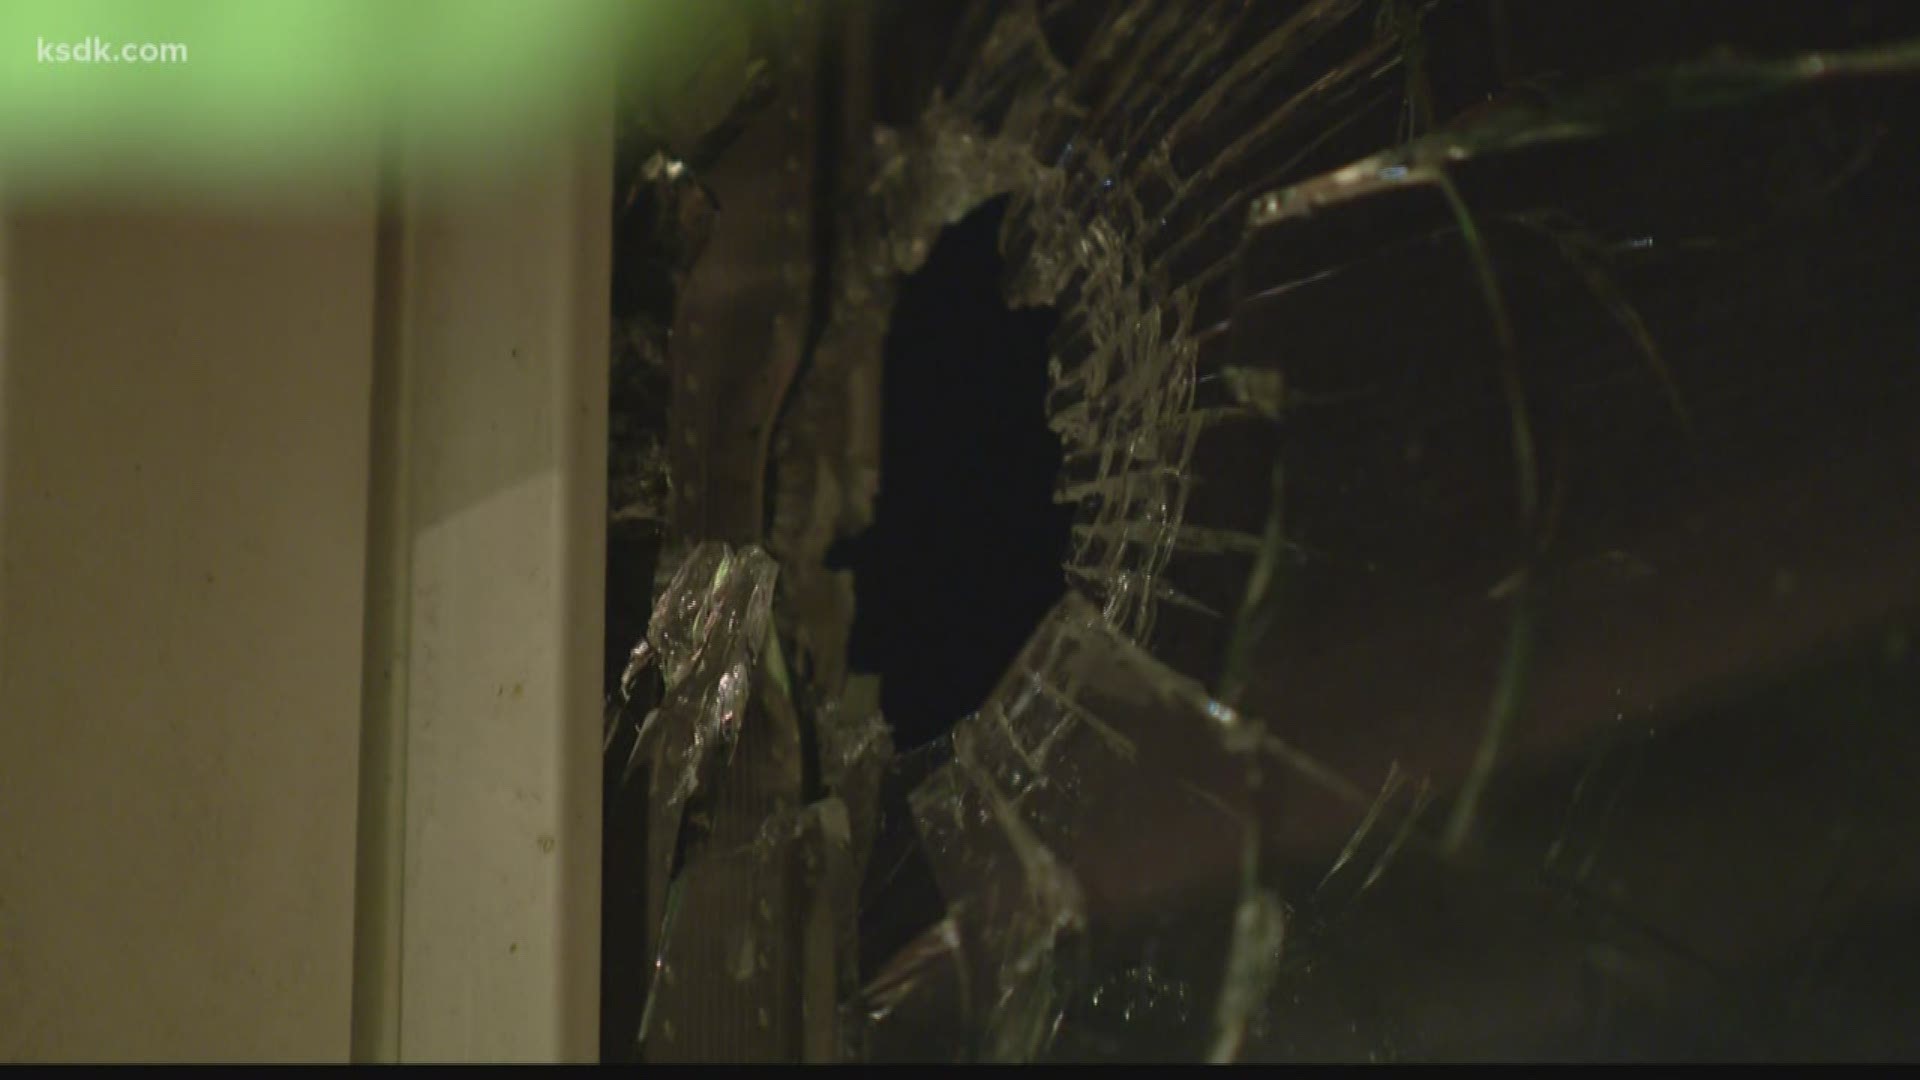 Children and employees ducked for cover when a stray bullet came flying into their St. Louis daycare.